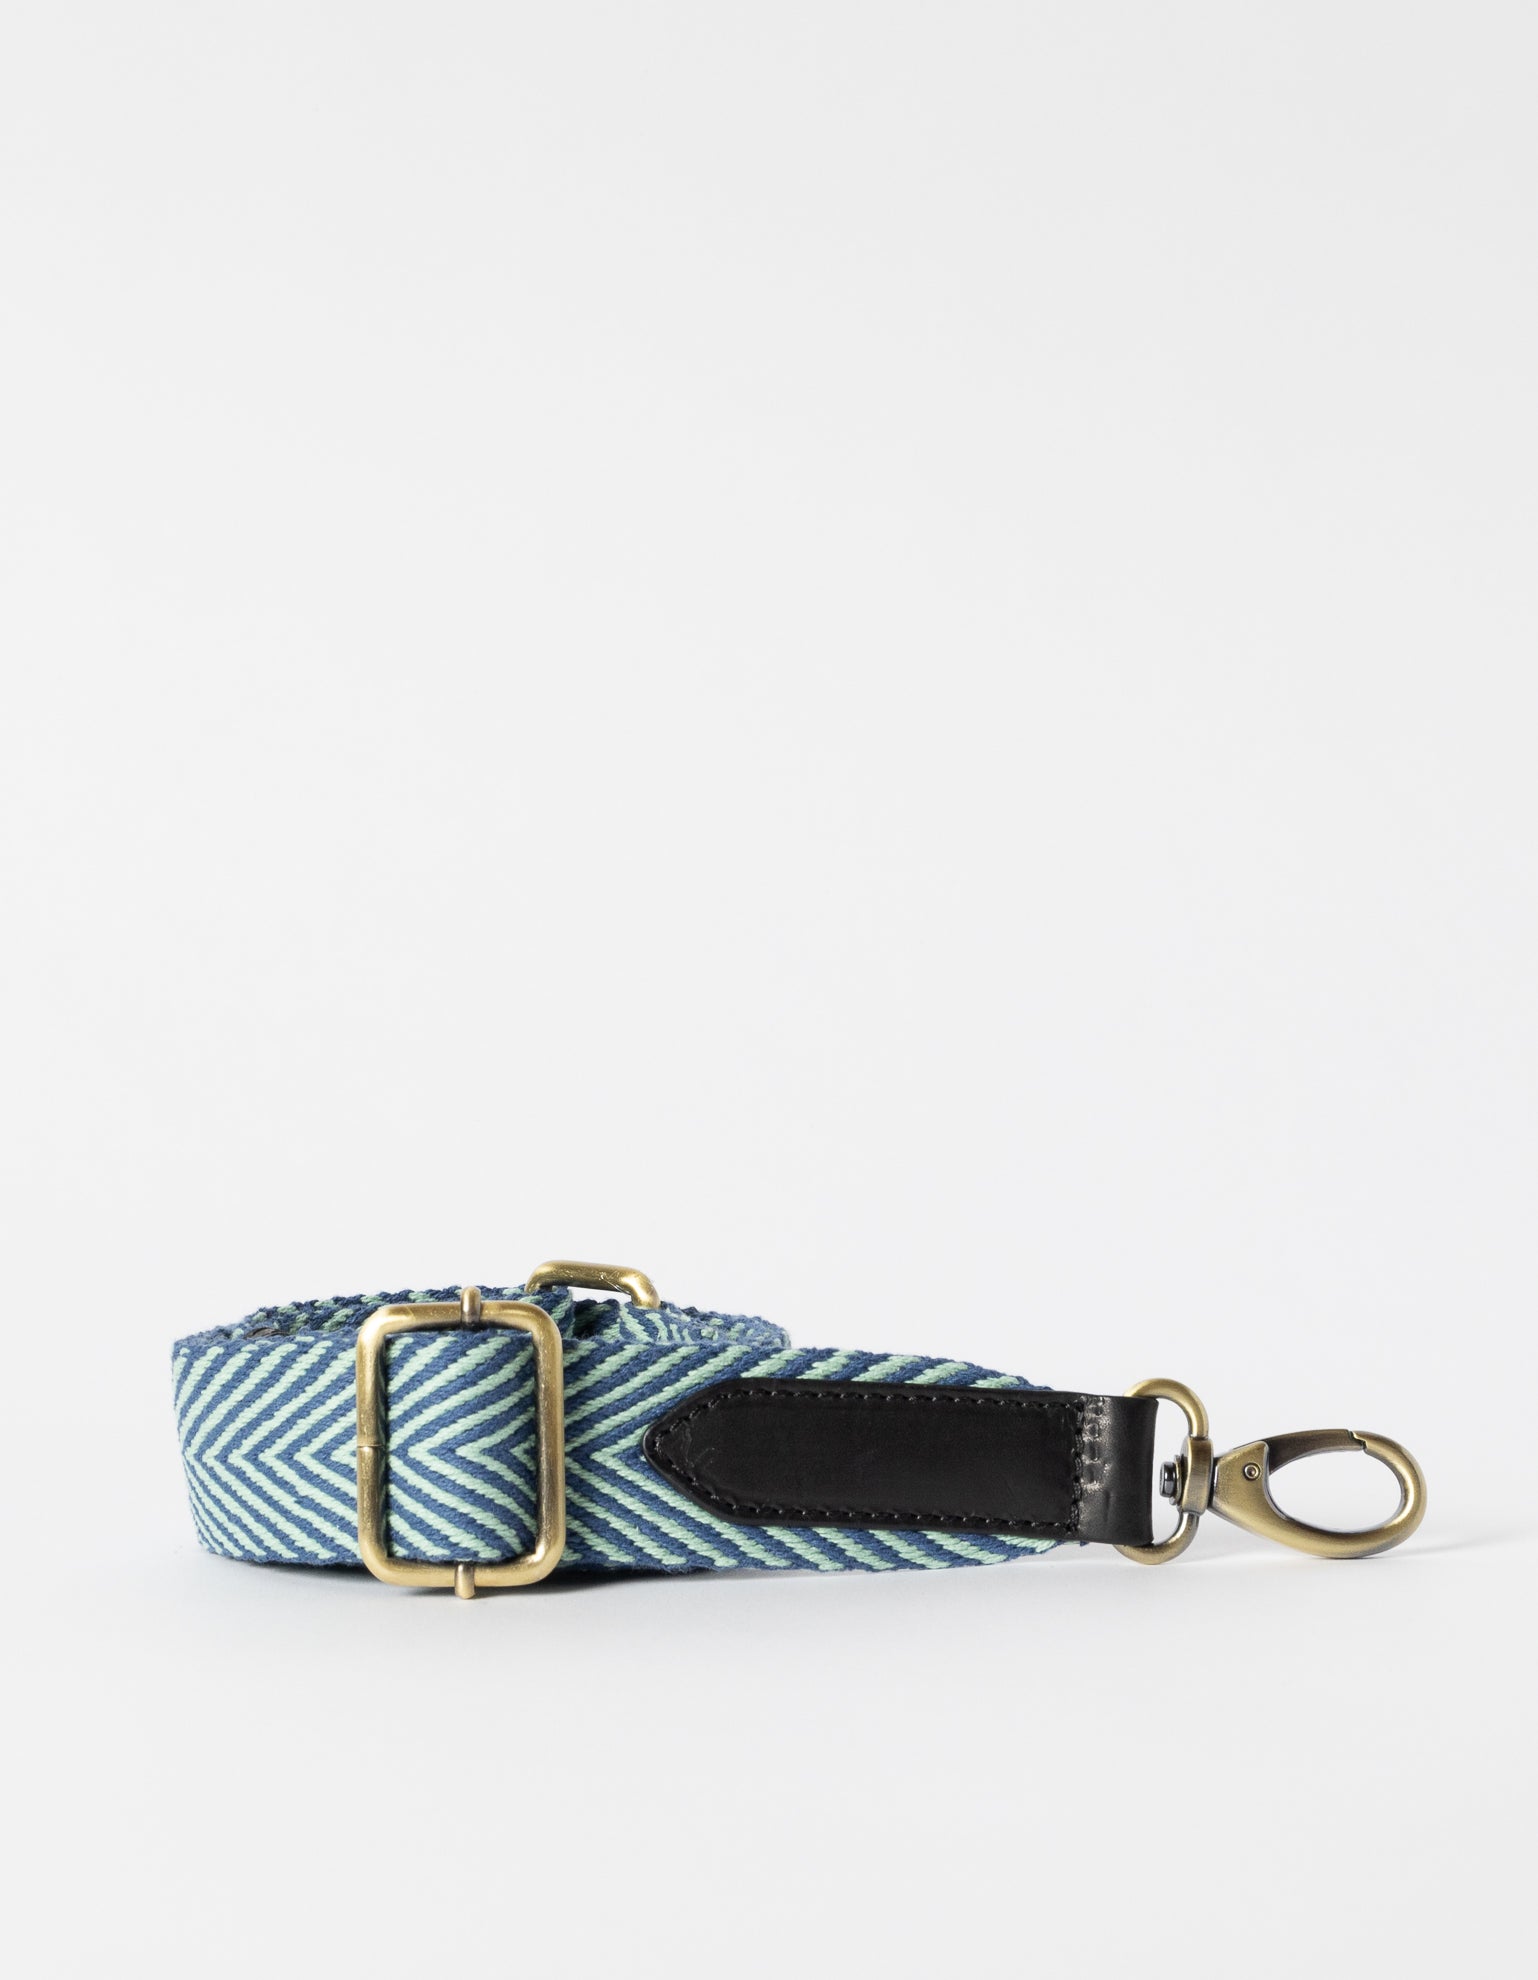 Recycled and organic cotton jade webbing strap with black leather